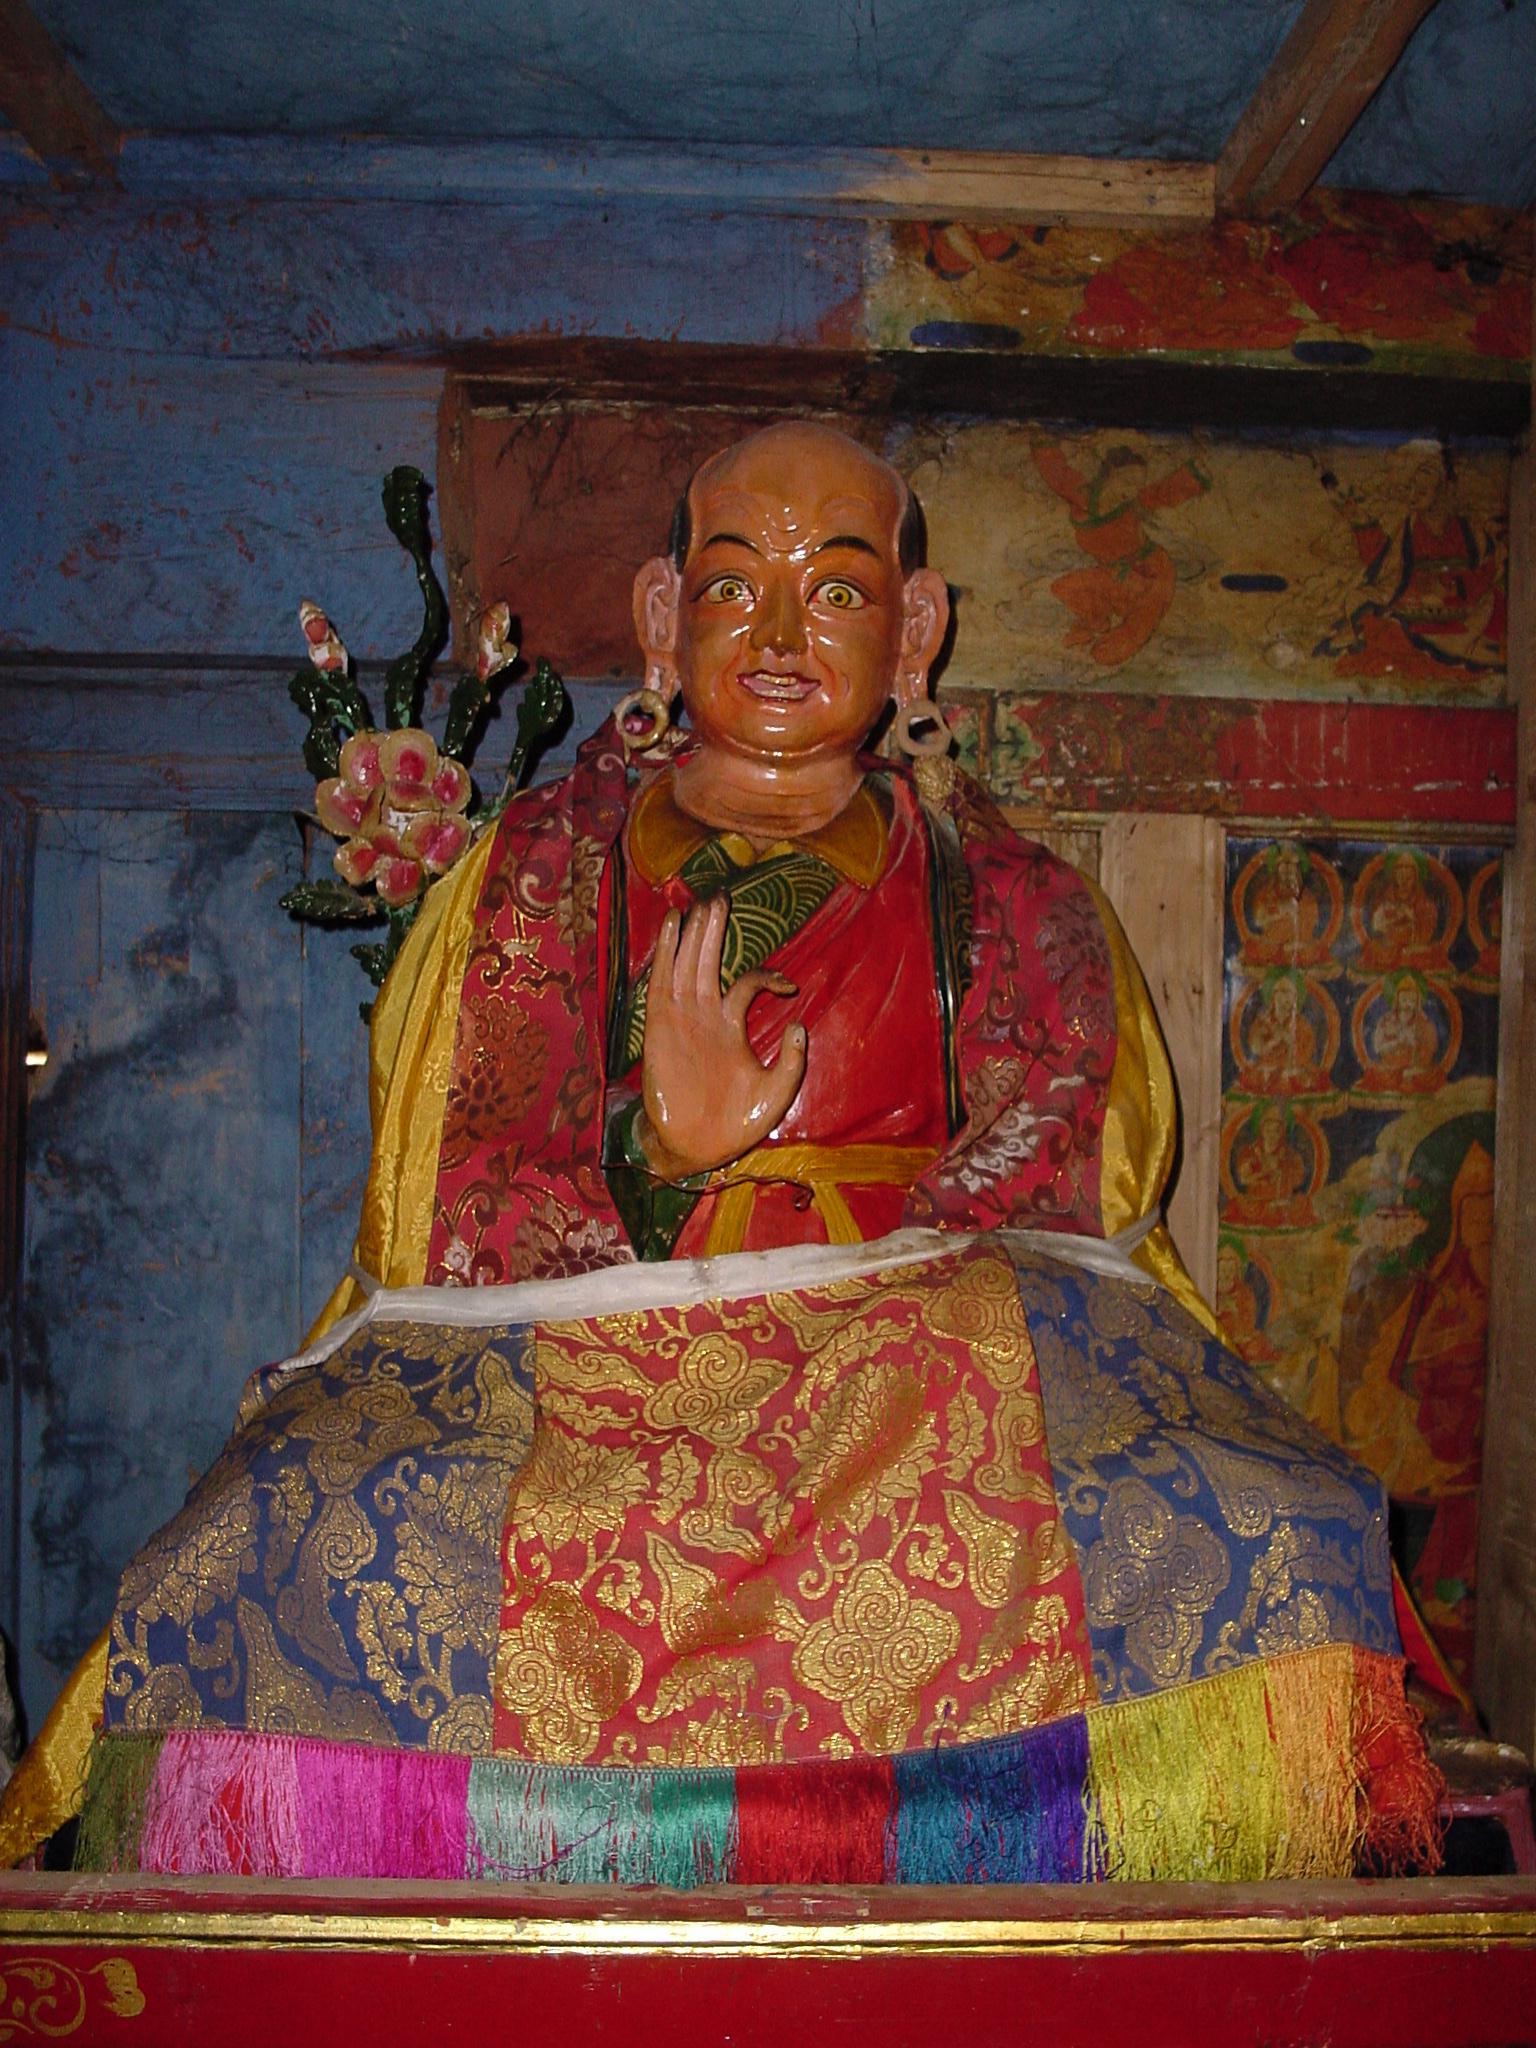 Polychrome statue of holy man holding left hand in mudra; adorned with colorful, embroidered textiles